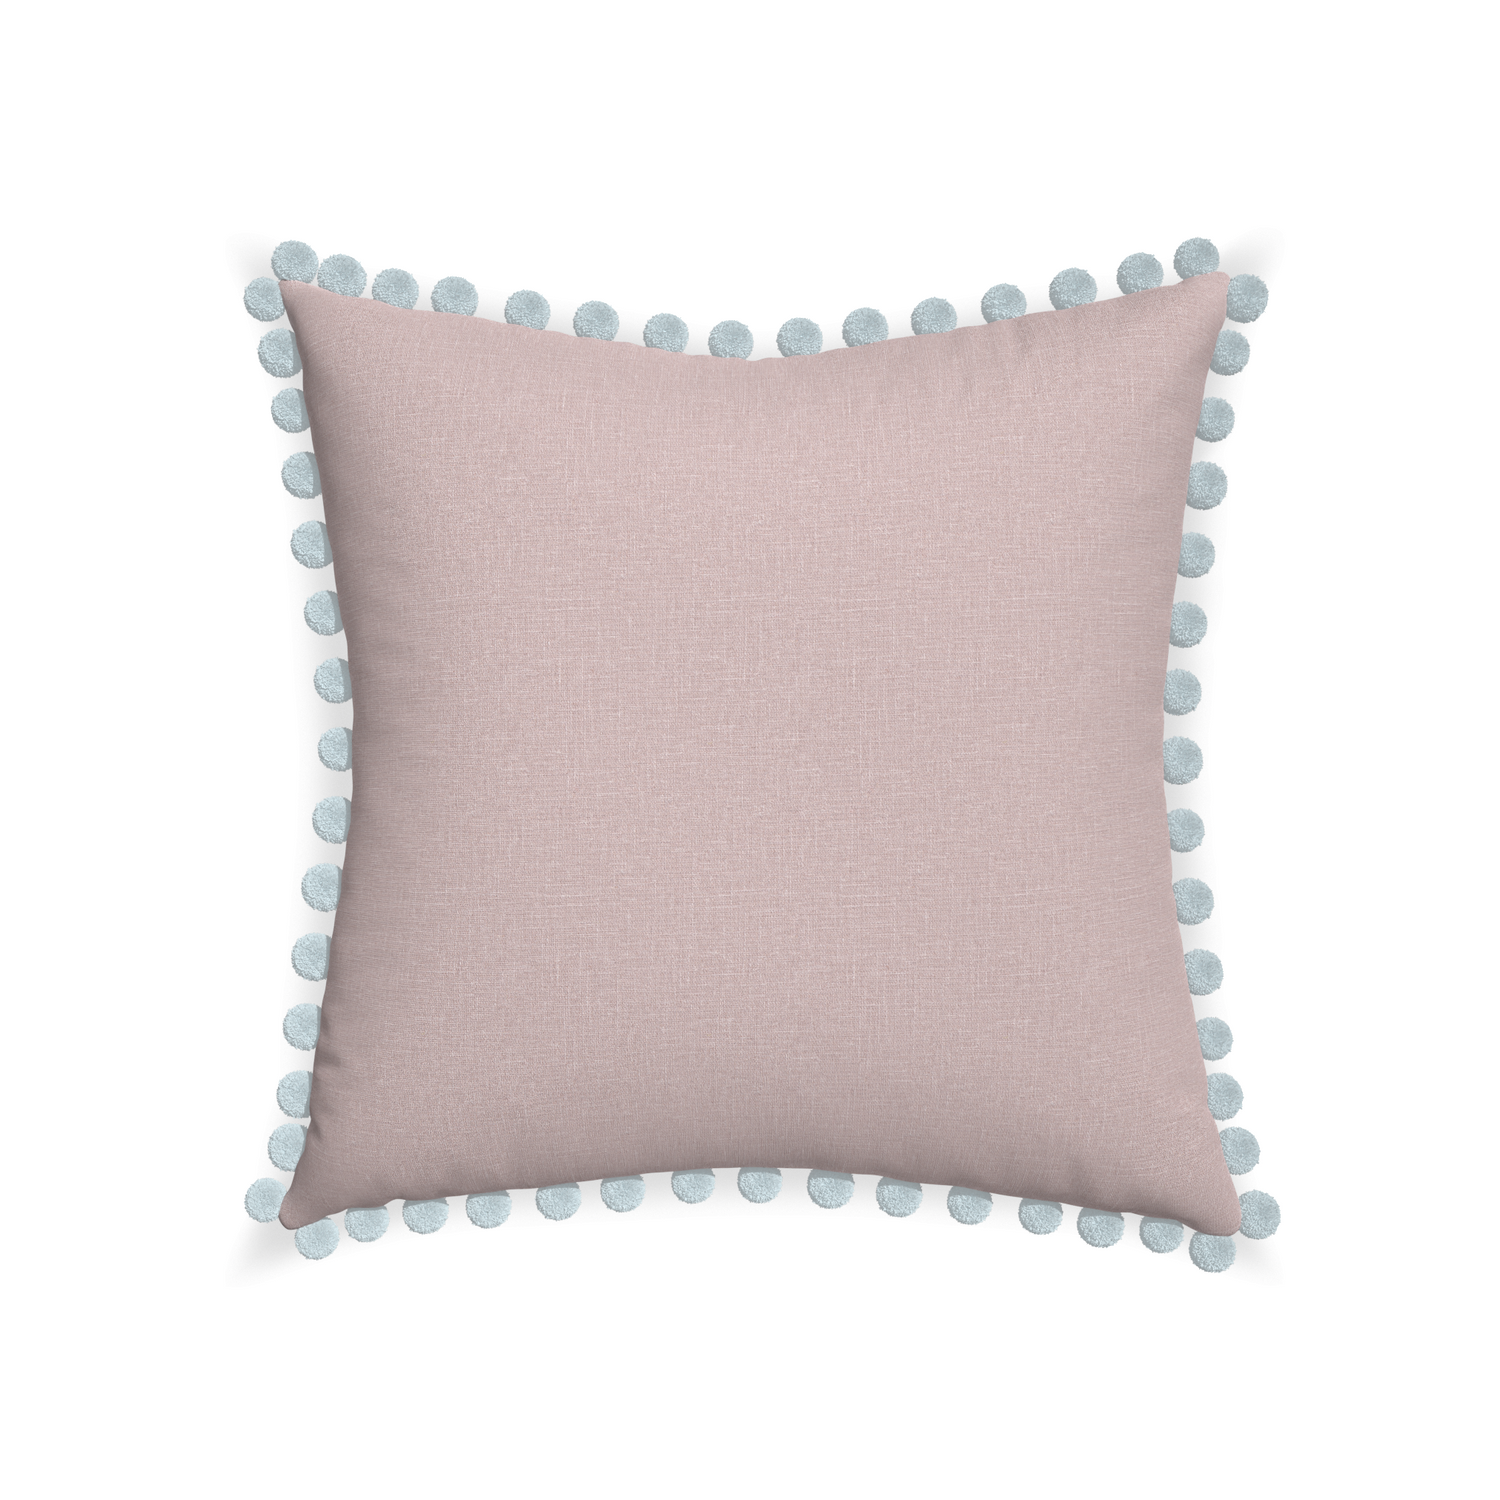 22-square orchid custom mauve pinkpillow with powder pom pom on white background